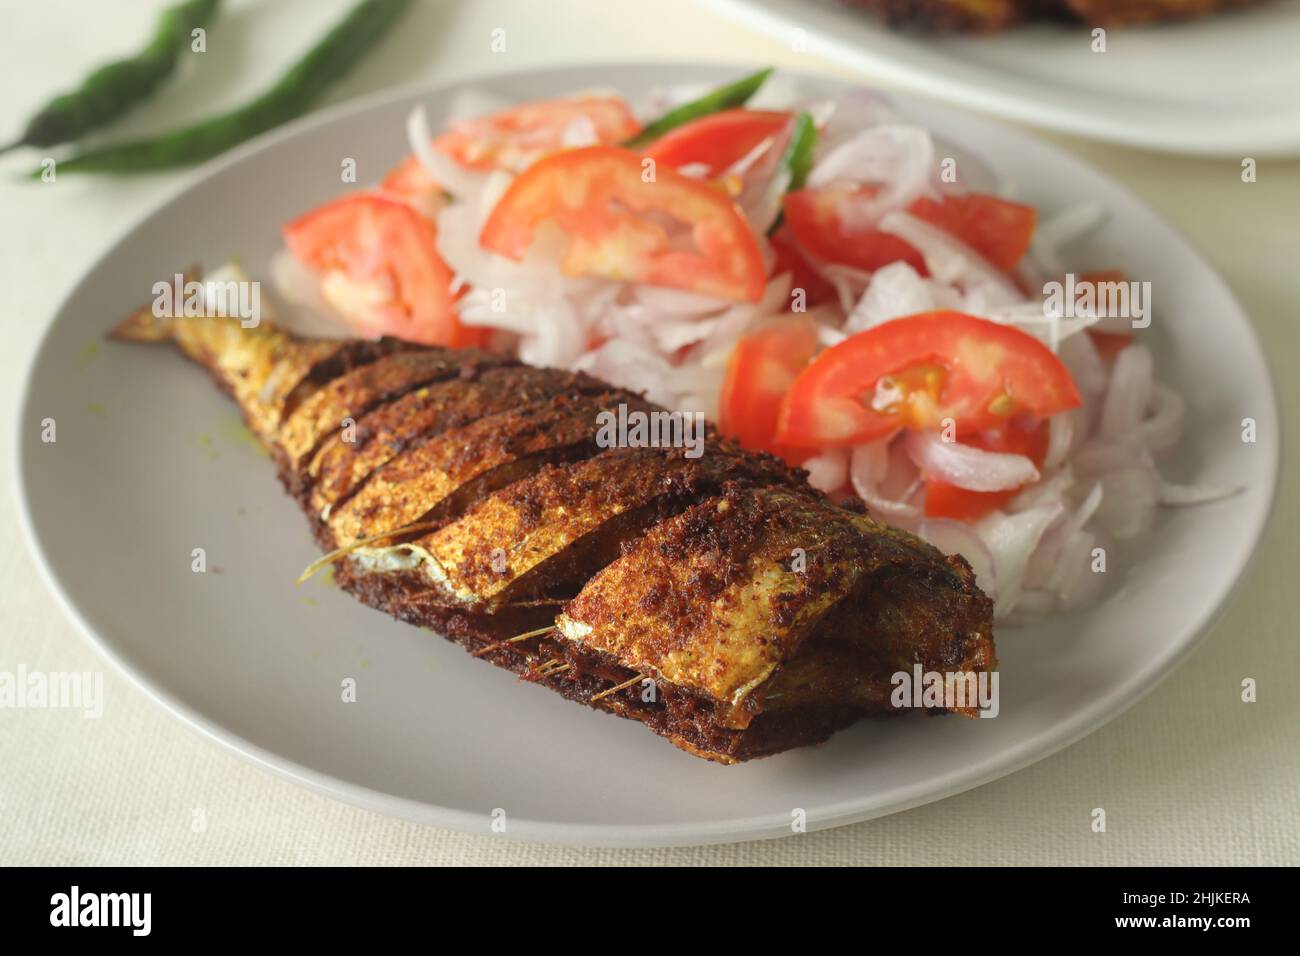 Ayala Meen fry or Mackerel fish fry. Spicy fish fry prepared in South Indian style. Mackerel fish marinated in an oil marinade and shallow fried in oi Stock Photo